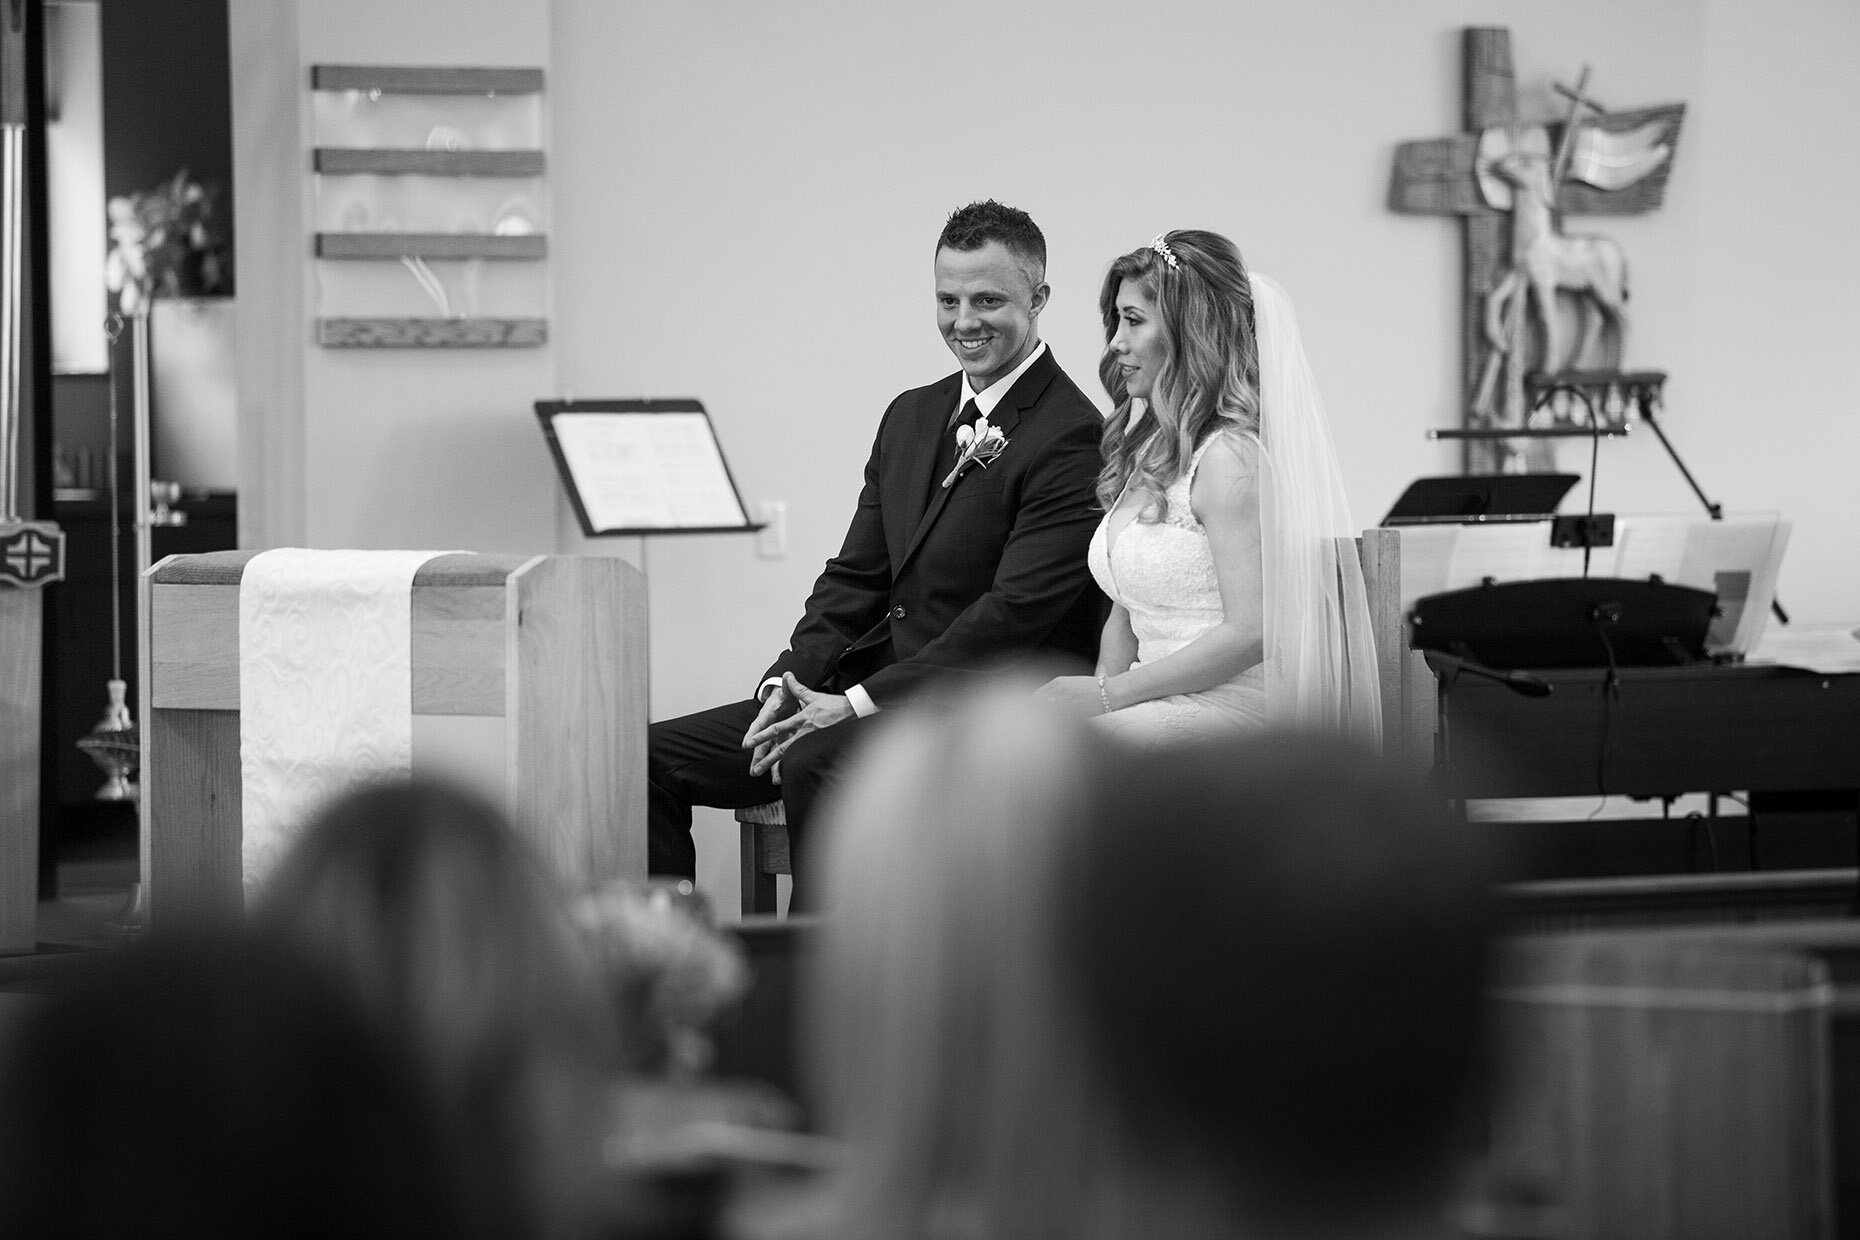 Couple at wedding in black and white